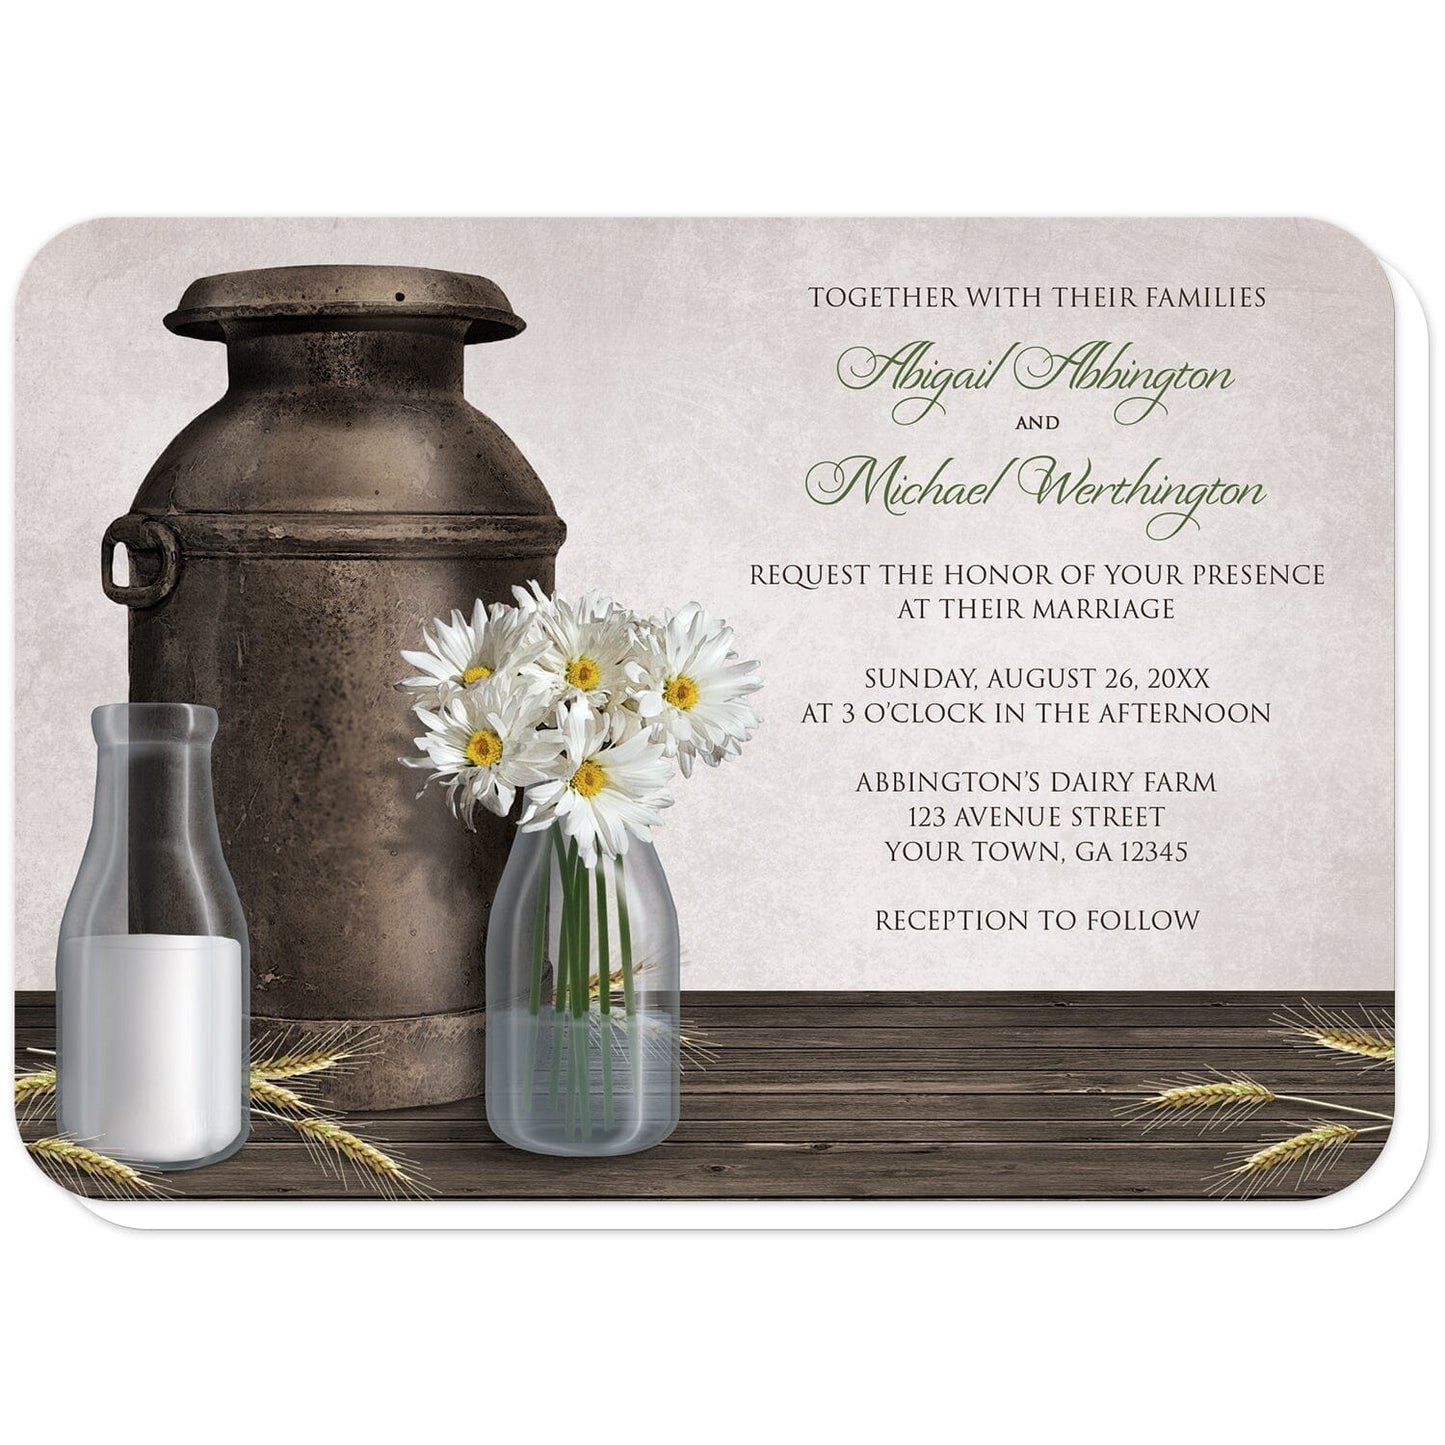 Rustic Country Dairy Farm Wedding Invitations (with rounded corners) at Artistically Invited. Rustic country dairy farm wedding invitations with an illustration of an antique milk can, two milk bottles (one with milk, the other with white daisies and water) on a dark wood tabletop with hay stems. Your personalized marriage celebration details are custom printed in brown and green over a light parchment-colored background.